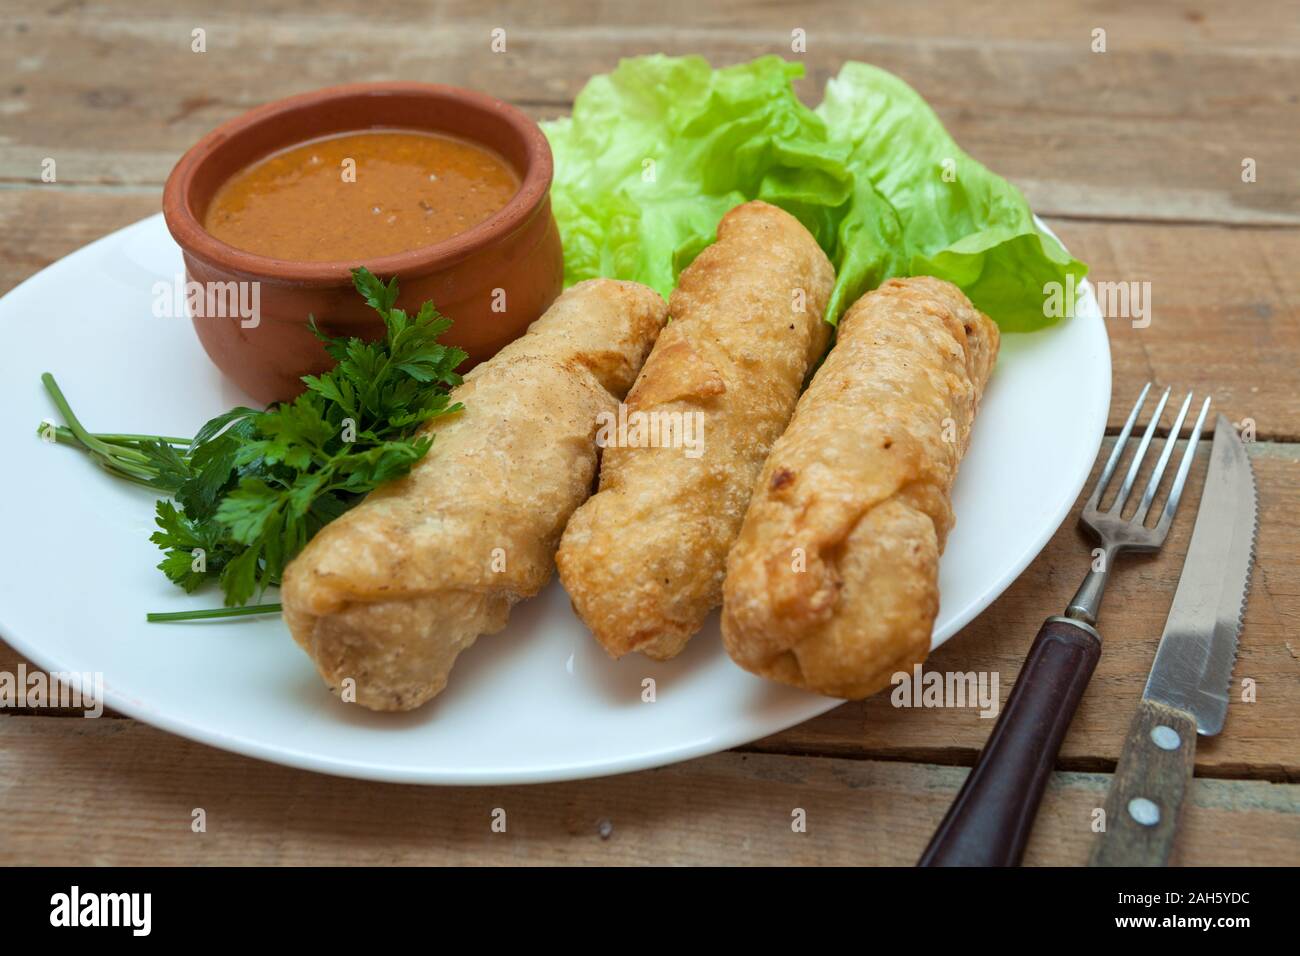 Chicken roll with sauce and vegetables Stock Photo